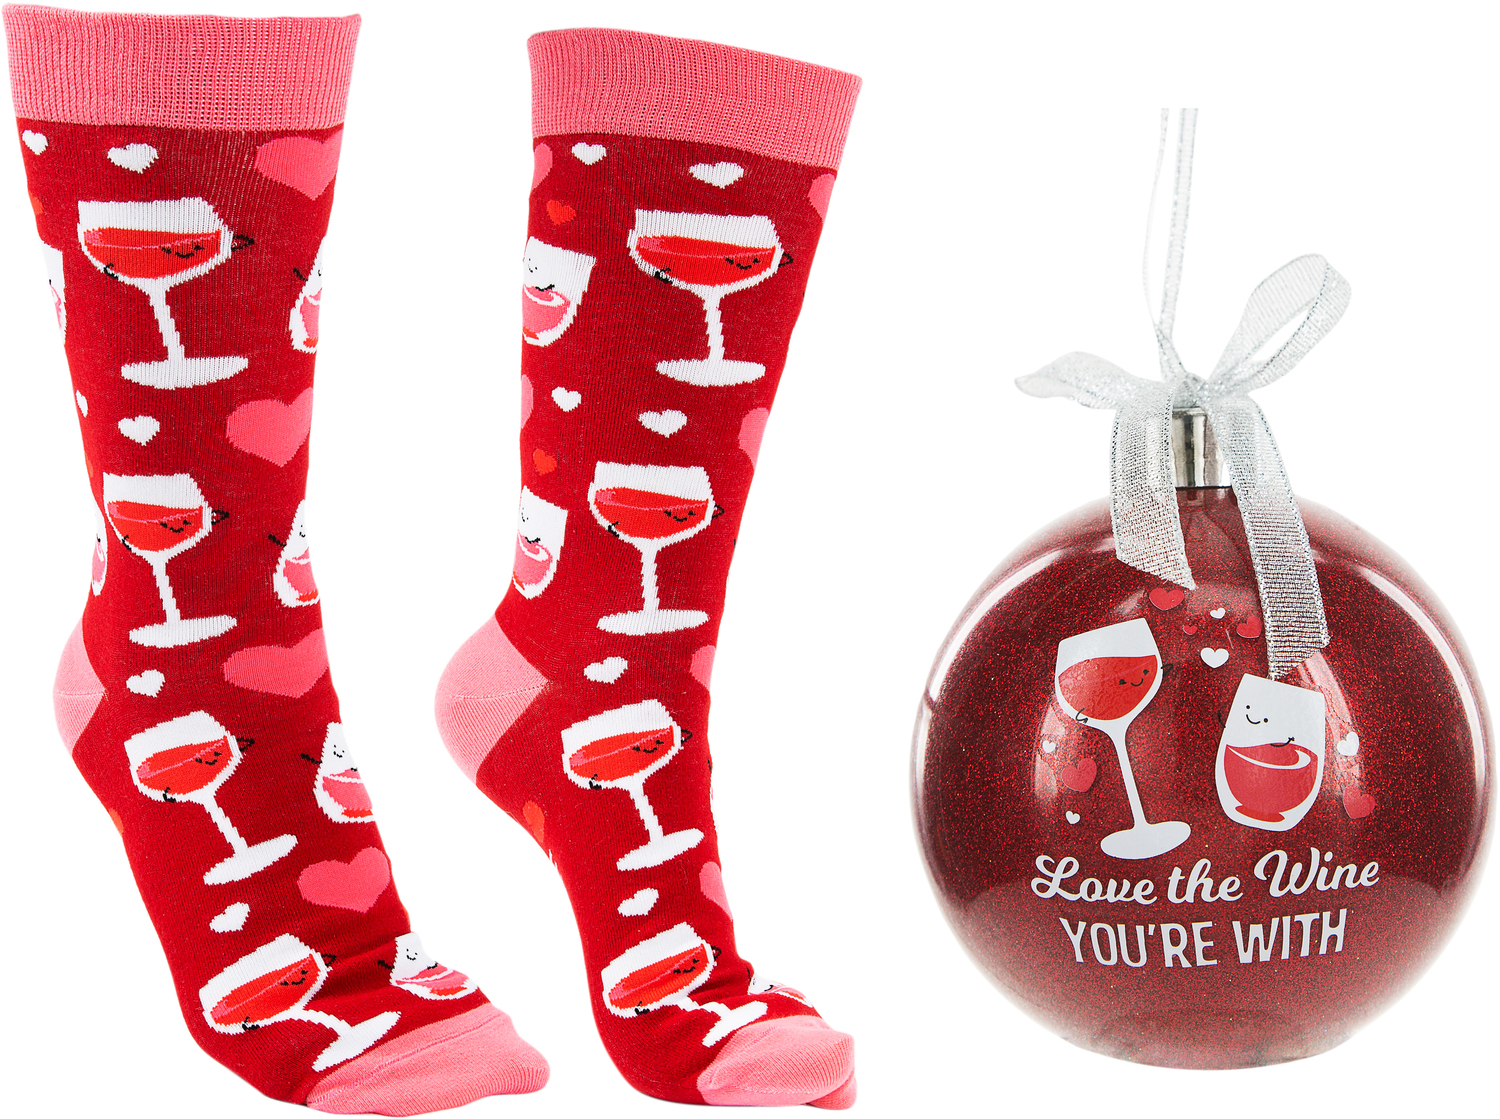 The Wine You're With by Late Night Last Call - The Wine You're With - 4" Ornament with Unisex Holiday Socks